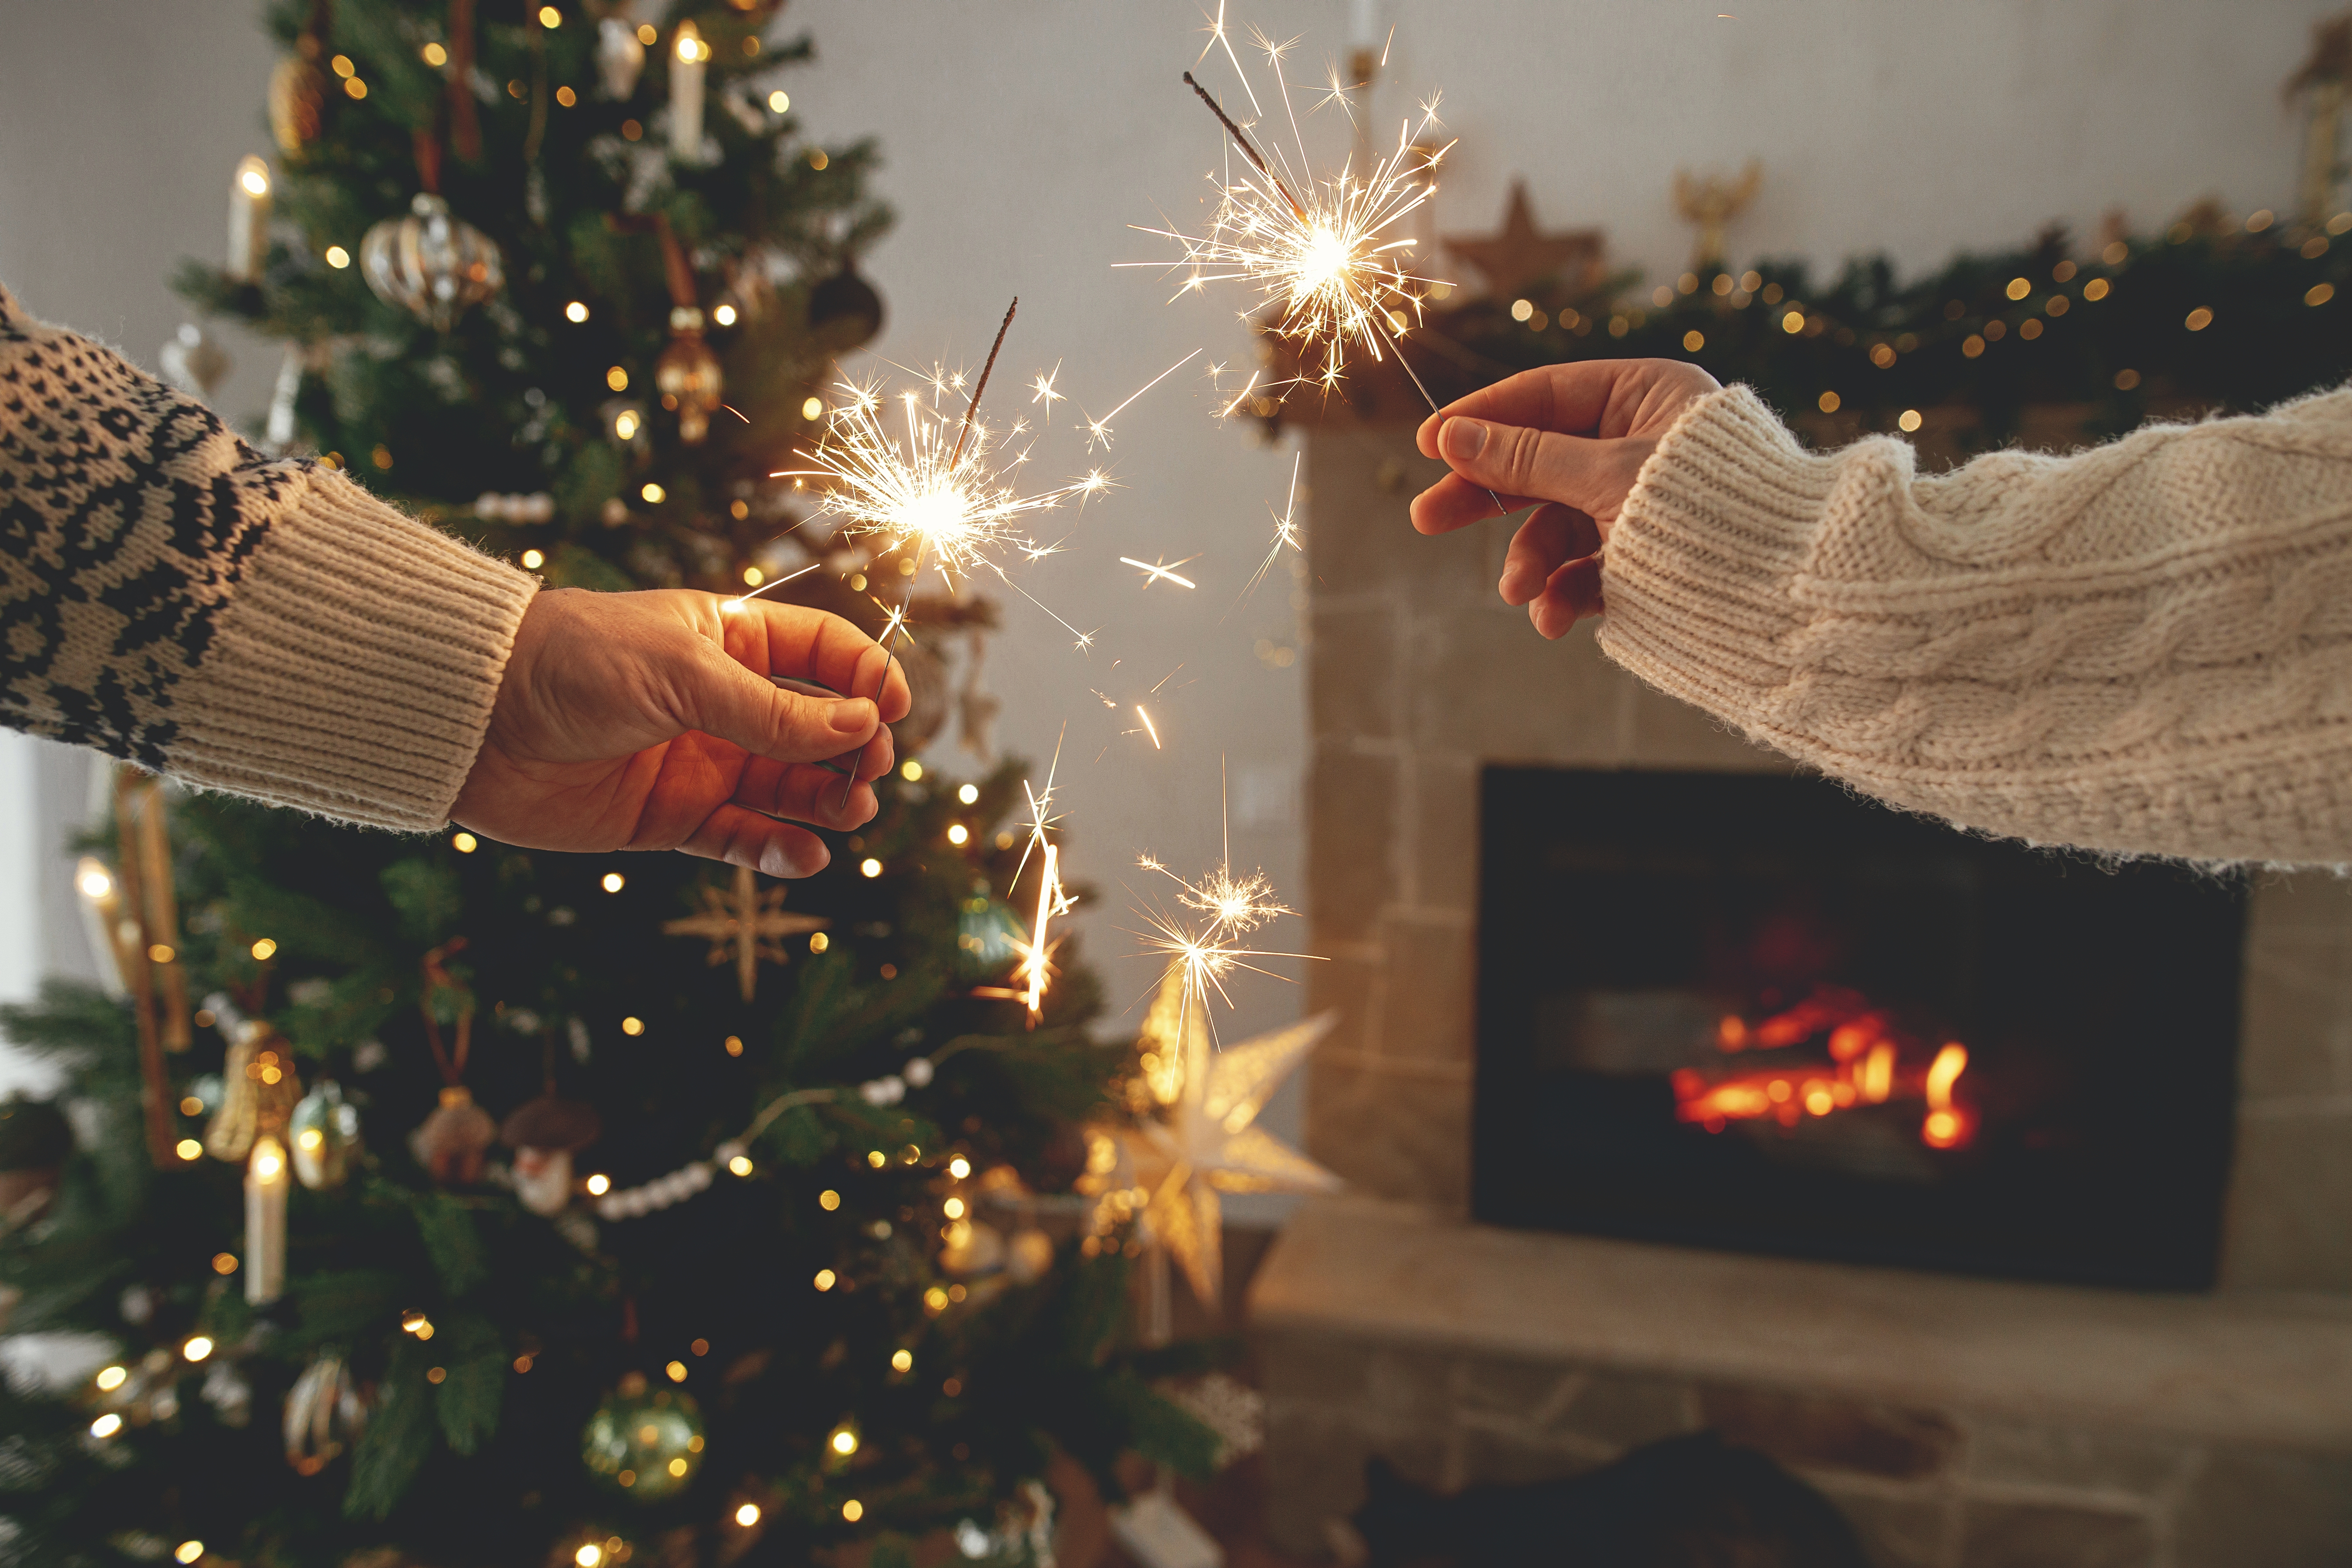 Two people burning sparklers near a Christmas tree | Source: Shutterstock